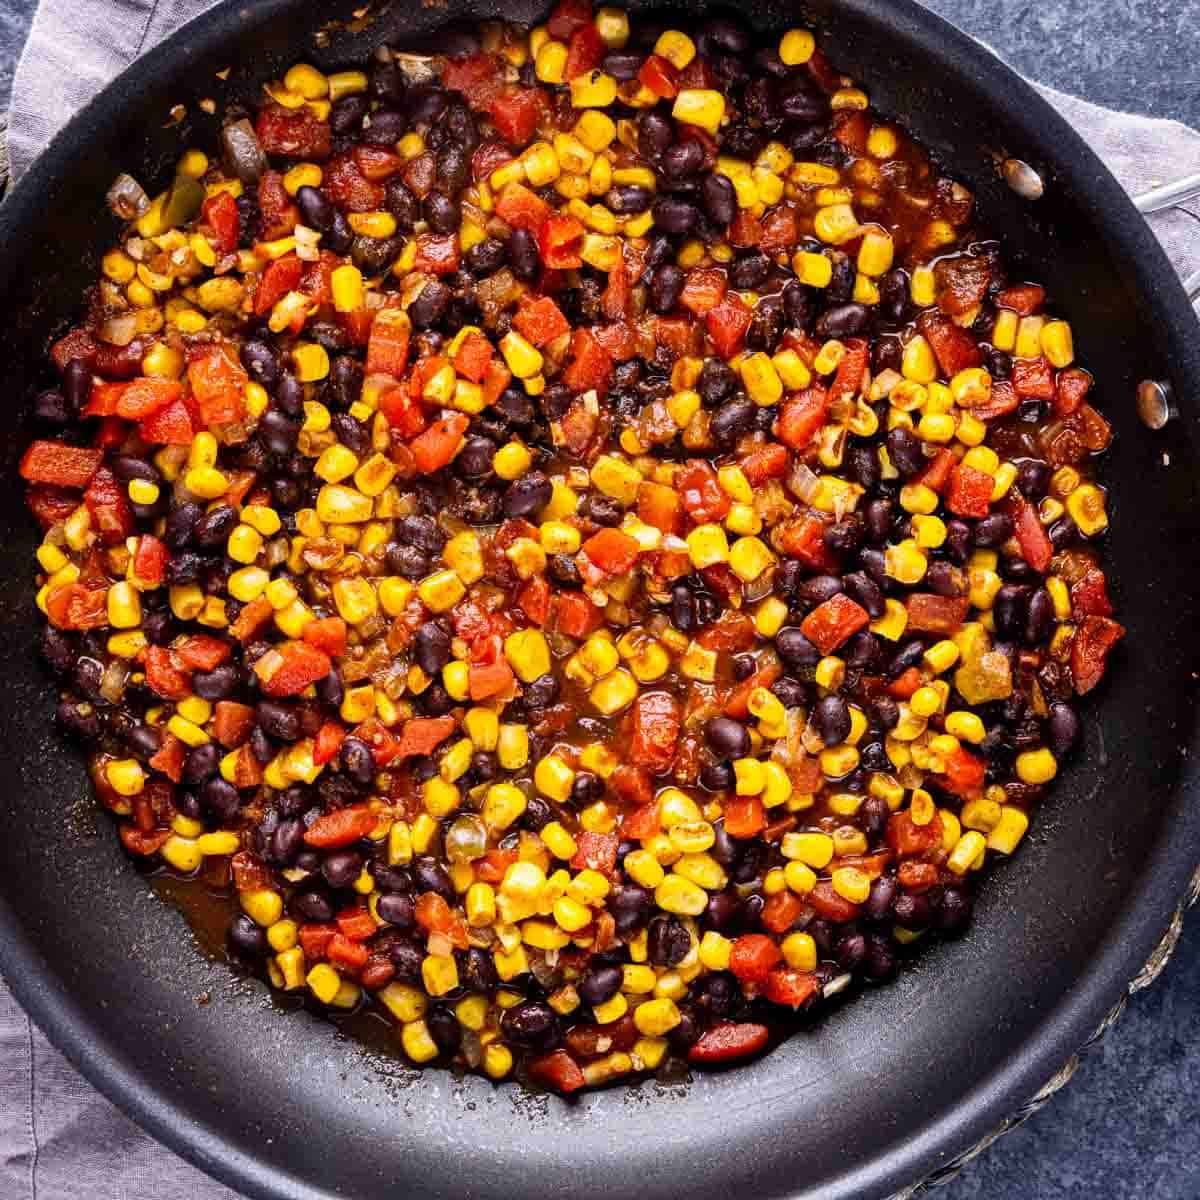 A skillet with One Pot Mexican Chicken and Rice, mixed sautéed vegetables including corn, black beans, and red peppers.